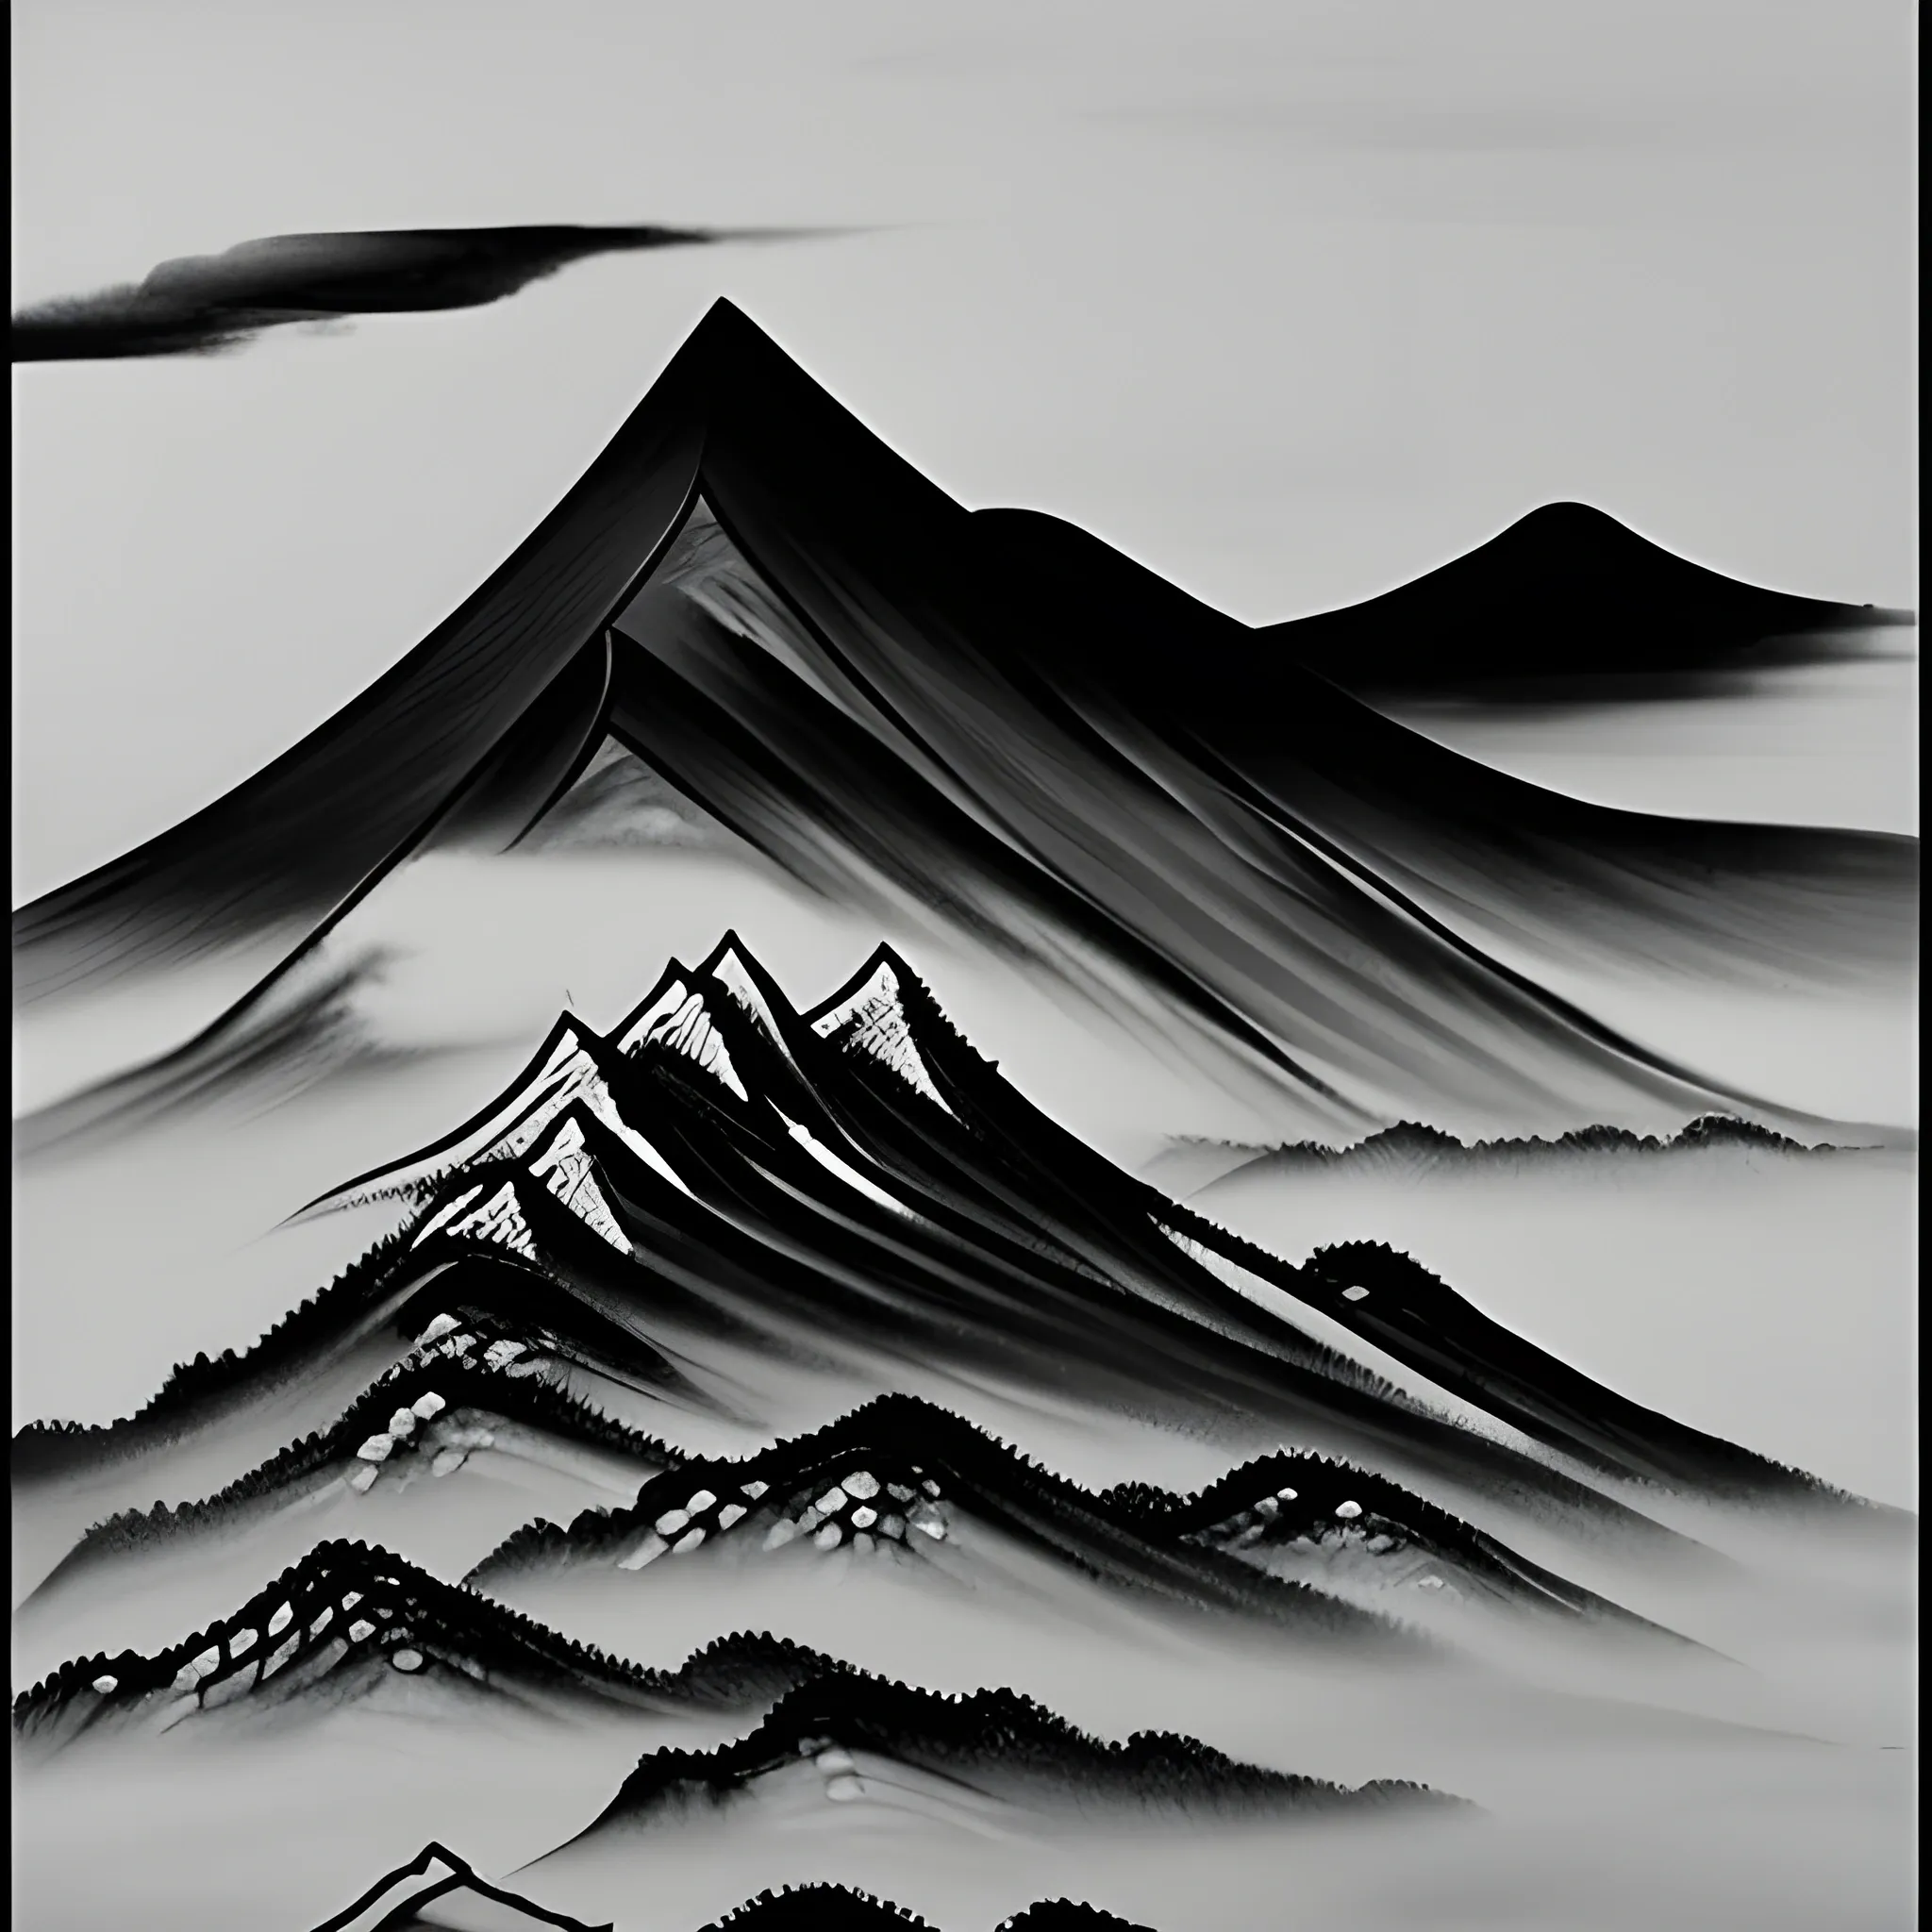 Produce a black and white Chinese brush painting showcasing a misty mountain with softly curved contours and a tiny temple crowning its peak.